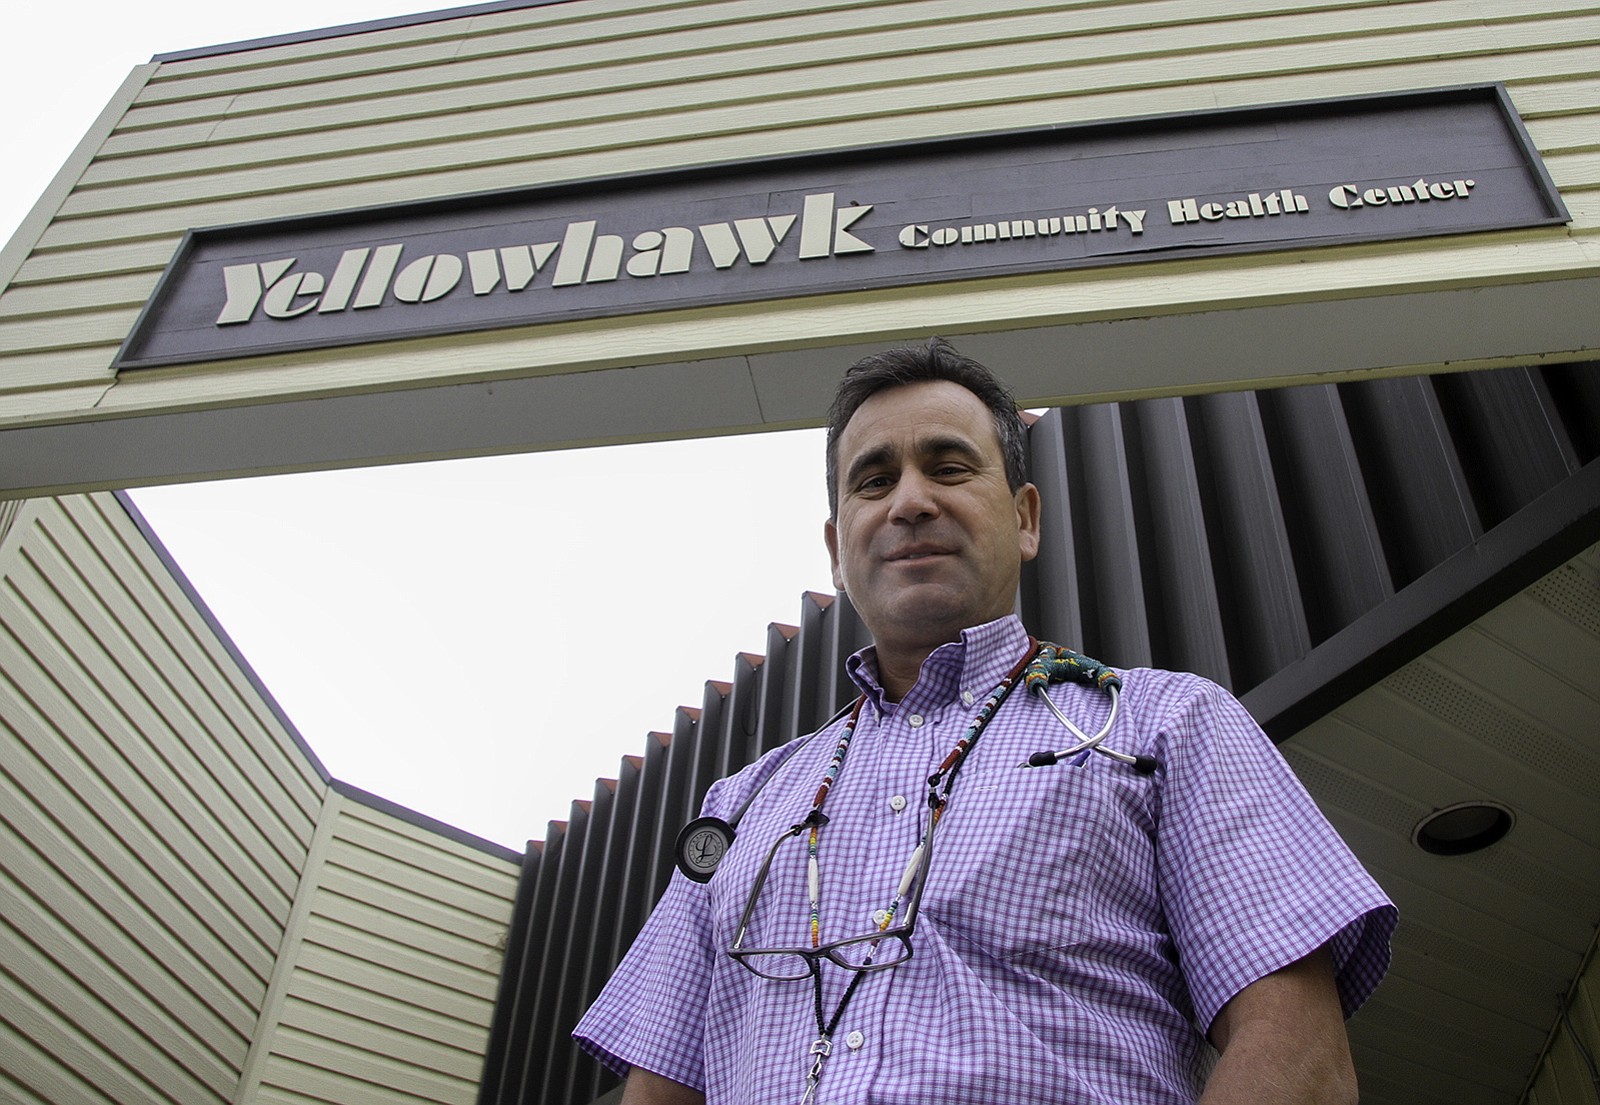 Dr. Rex &quot;Matt&quot; Quaempts, who grew up on Oregon's Umatilla Indian Reservation, poses last month in front of the Yellowhawk Community Health Center in Mission, Ore.